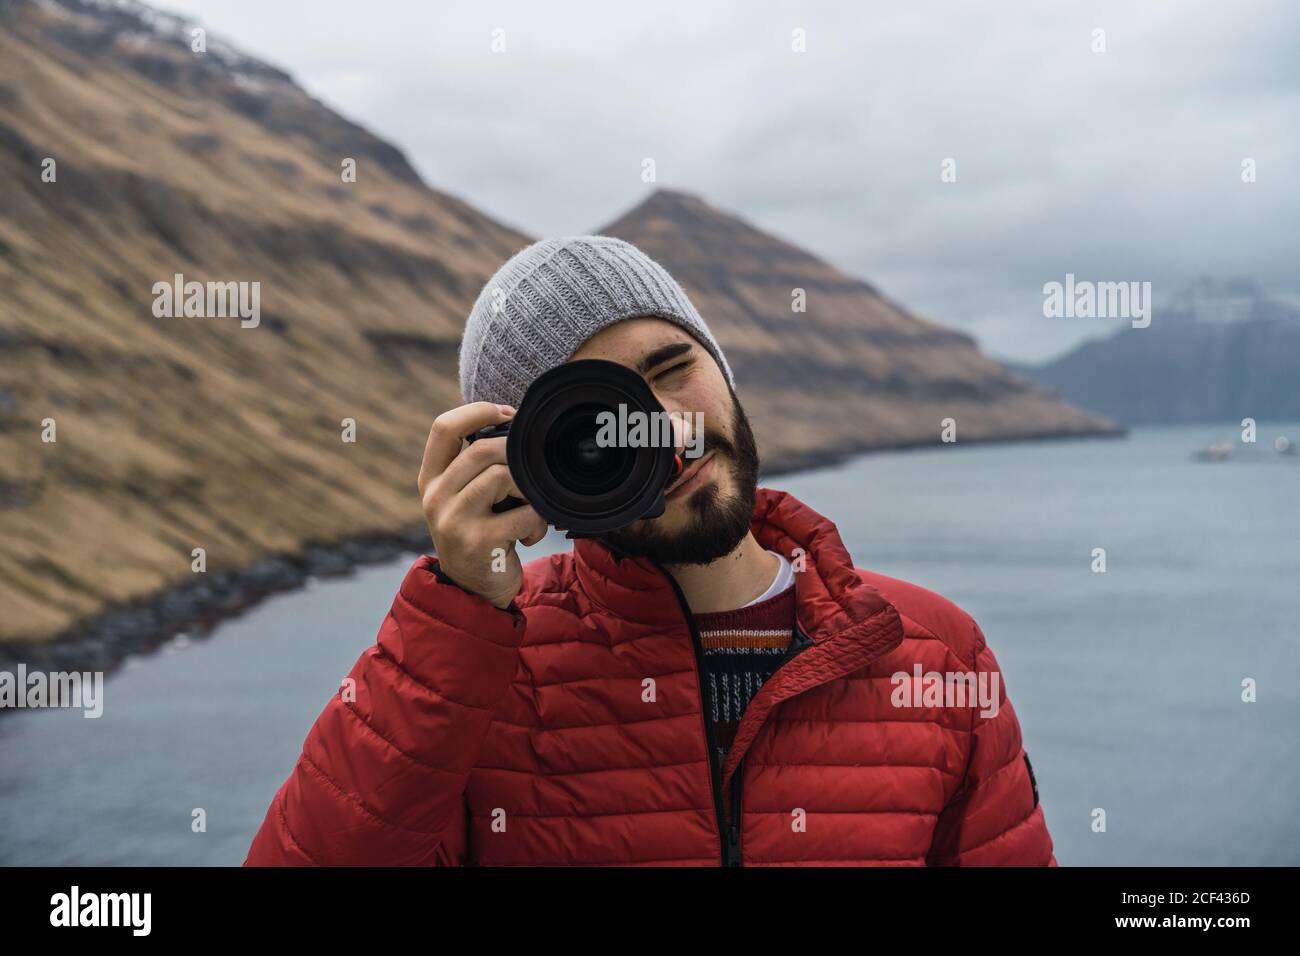 Bearded man in winter clothes pressing the shutter of a photo camera outdoors in Faroe Islands landscape Stock Photo